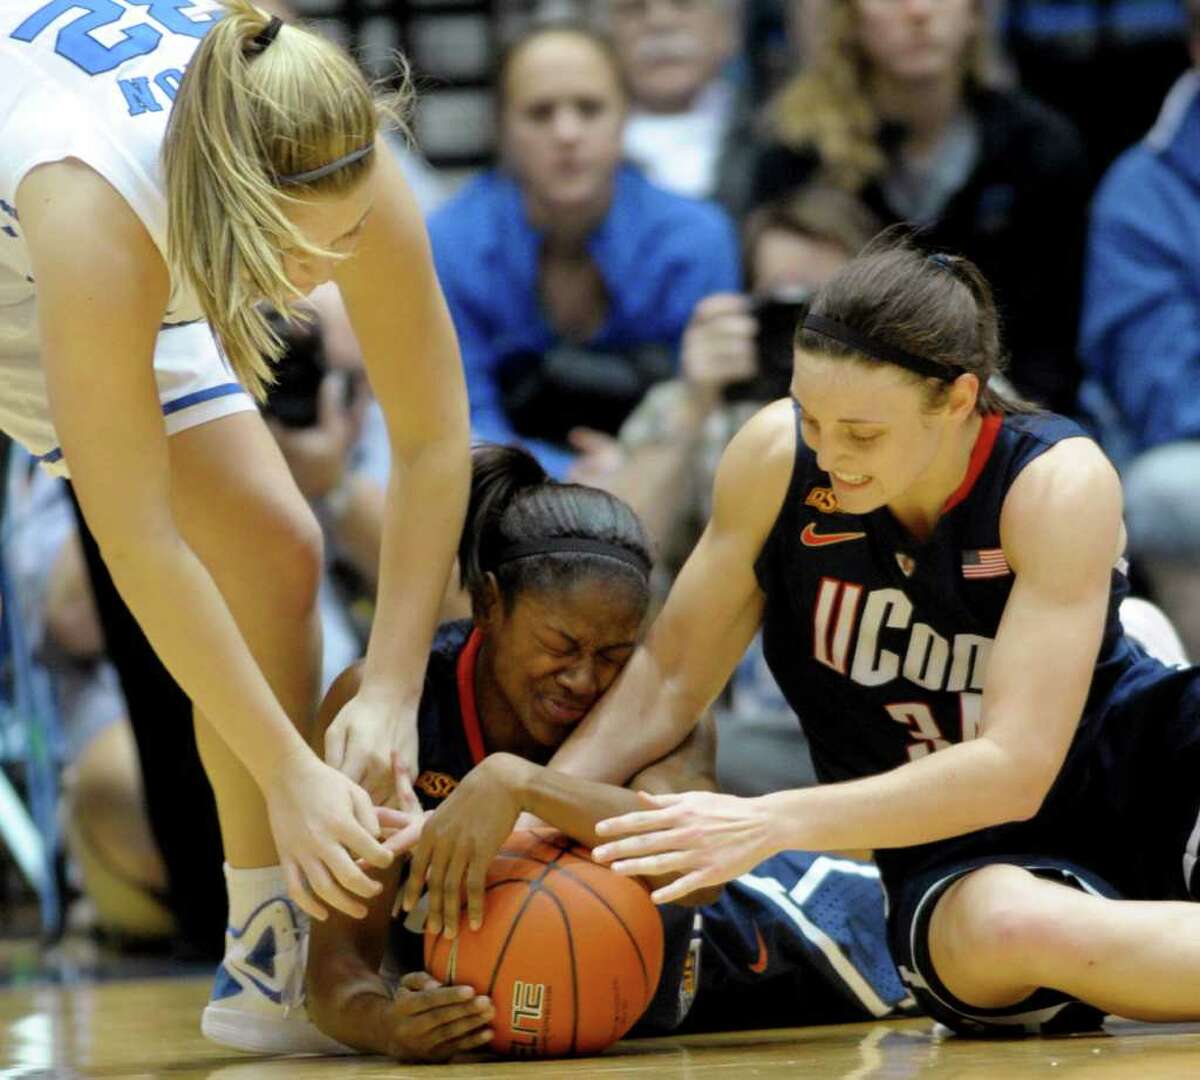 Connecticut's Tiffany Hayes (3) and Kelly Faris (34) battle for the ball from Duke's Tricia Liston (32) during the second half of an NCAA women's college basketball game, Monday, Jan. 30, 2012, in Durham, N.C. Connecticut won 61-45. (AP Photo/Sara D. Davis)